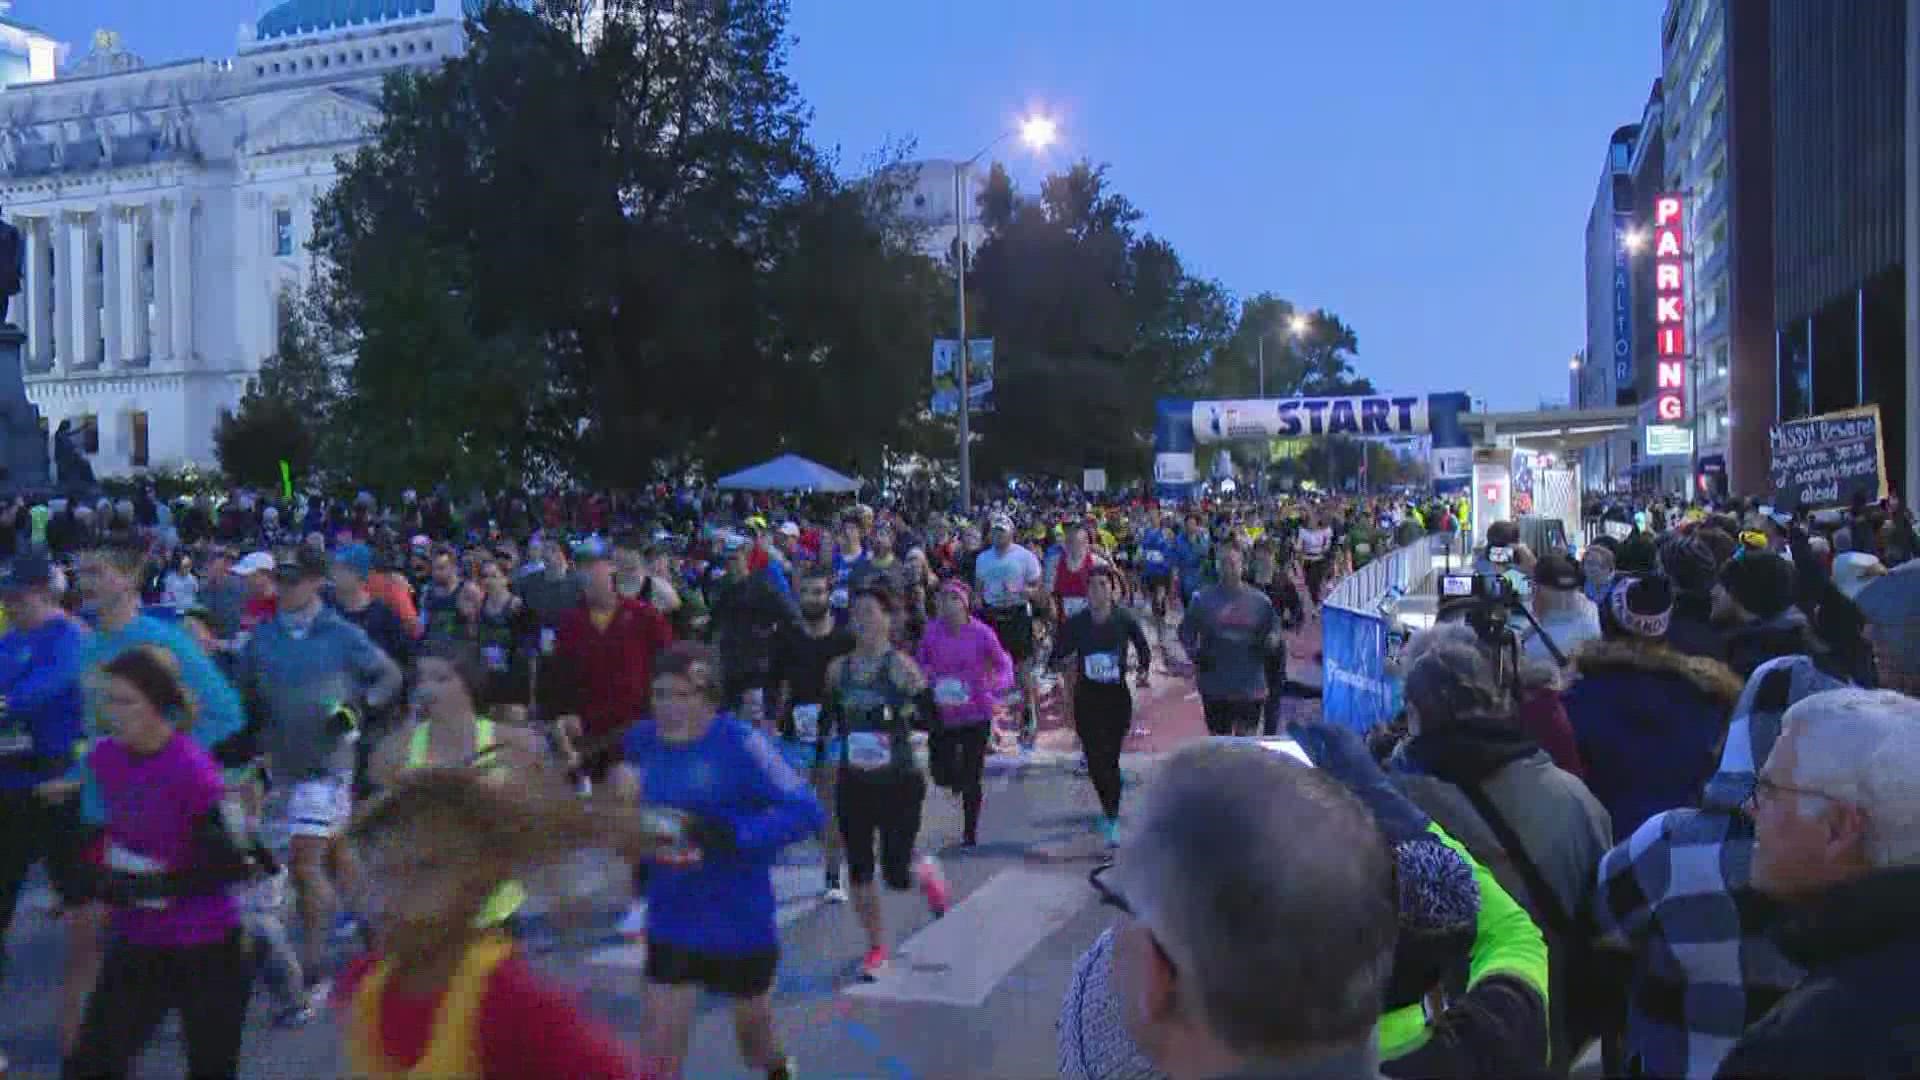 Temperatures were close to the freezing mark for the start of Saturday's Monumental Marathon.